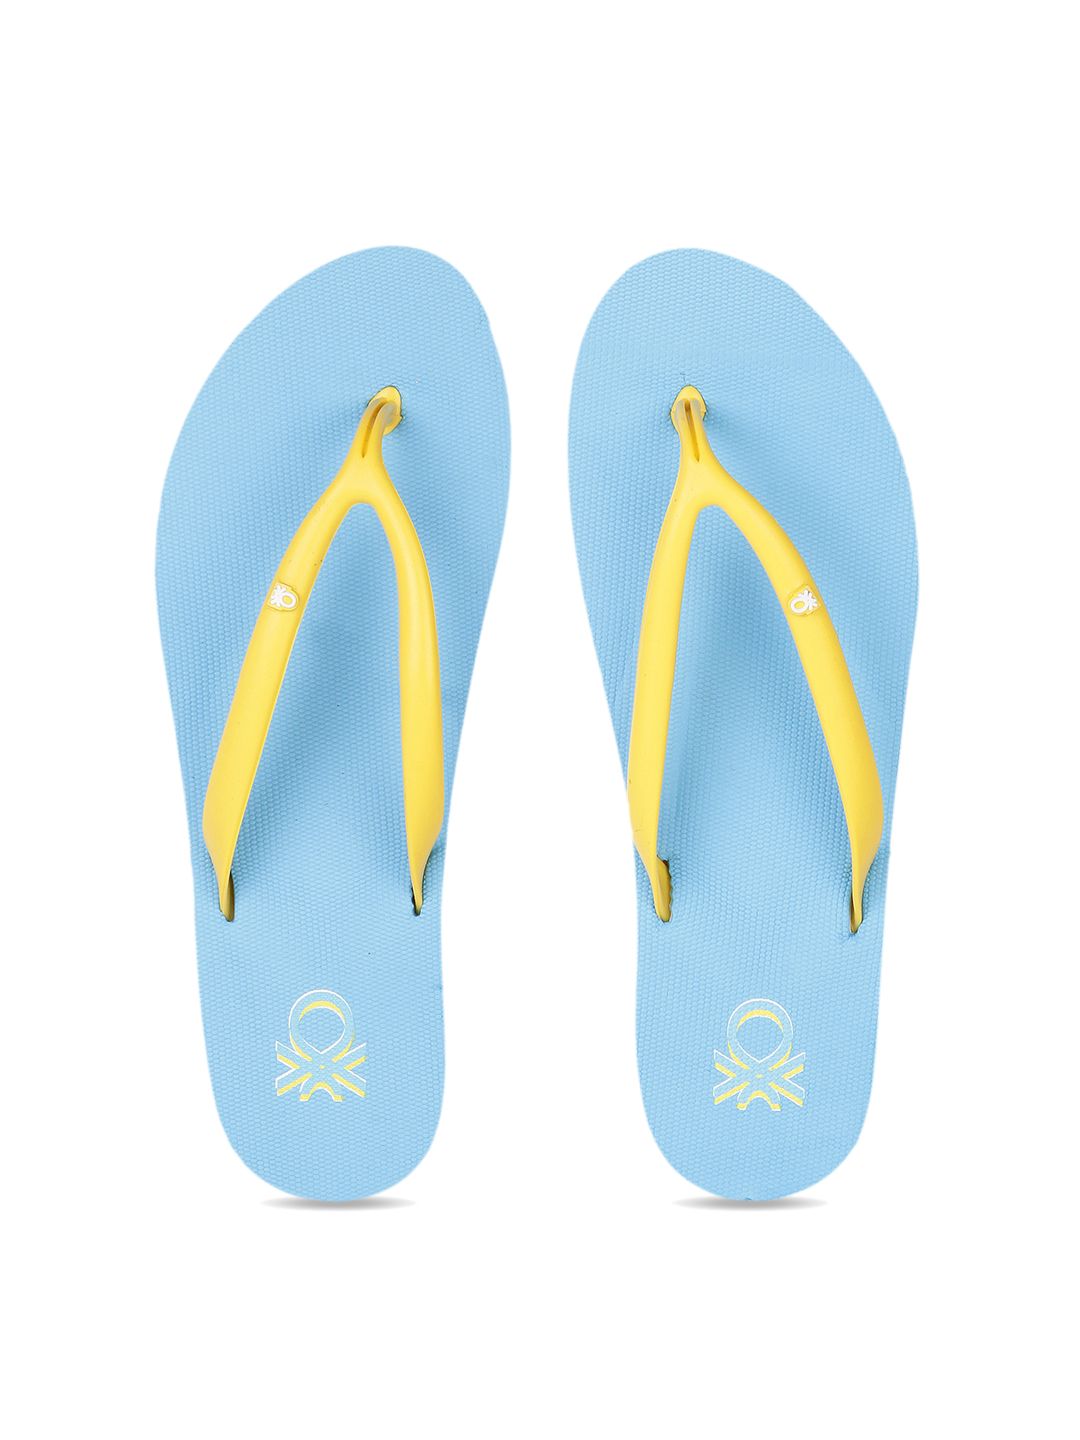 United Colors of Benetton Women Blue Solid Thong Flip-Flops Price in India